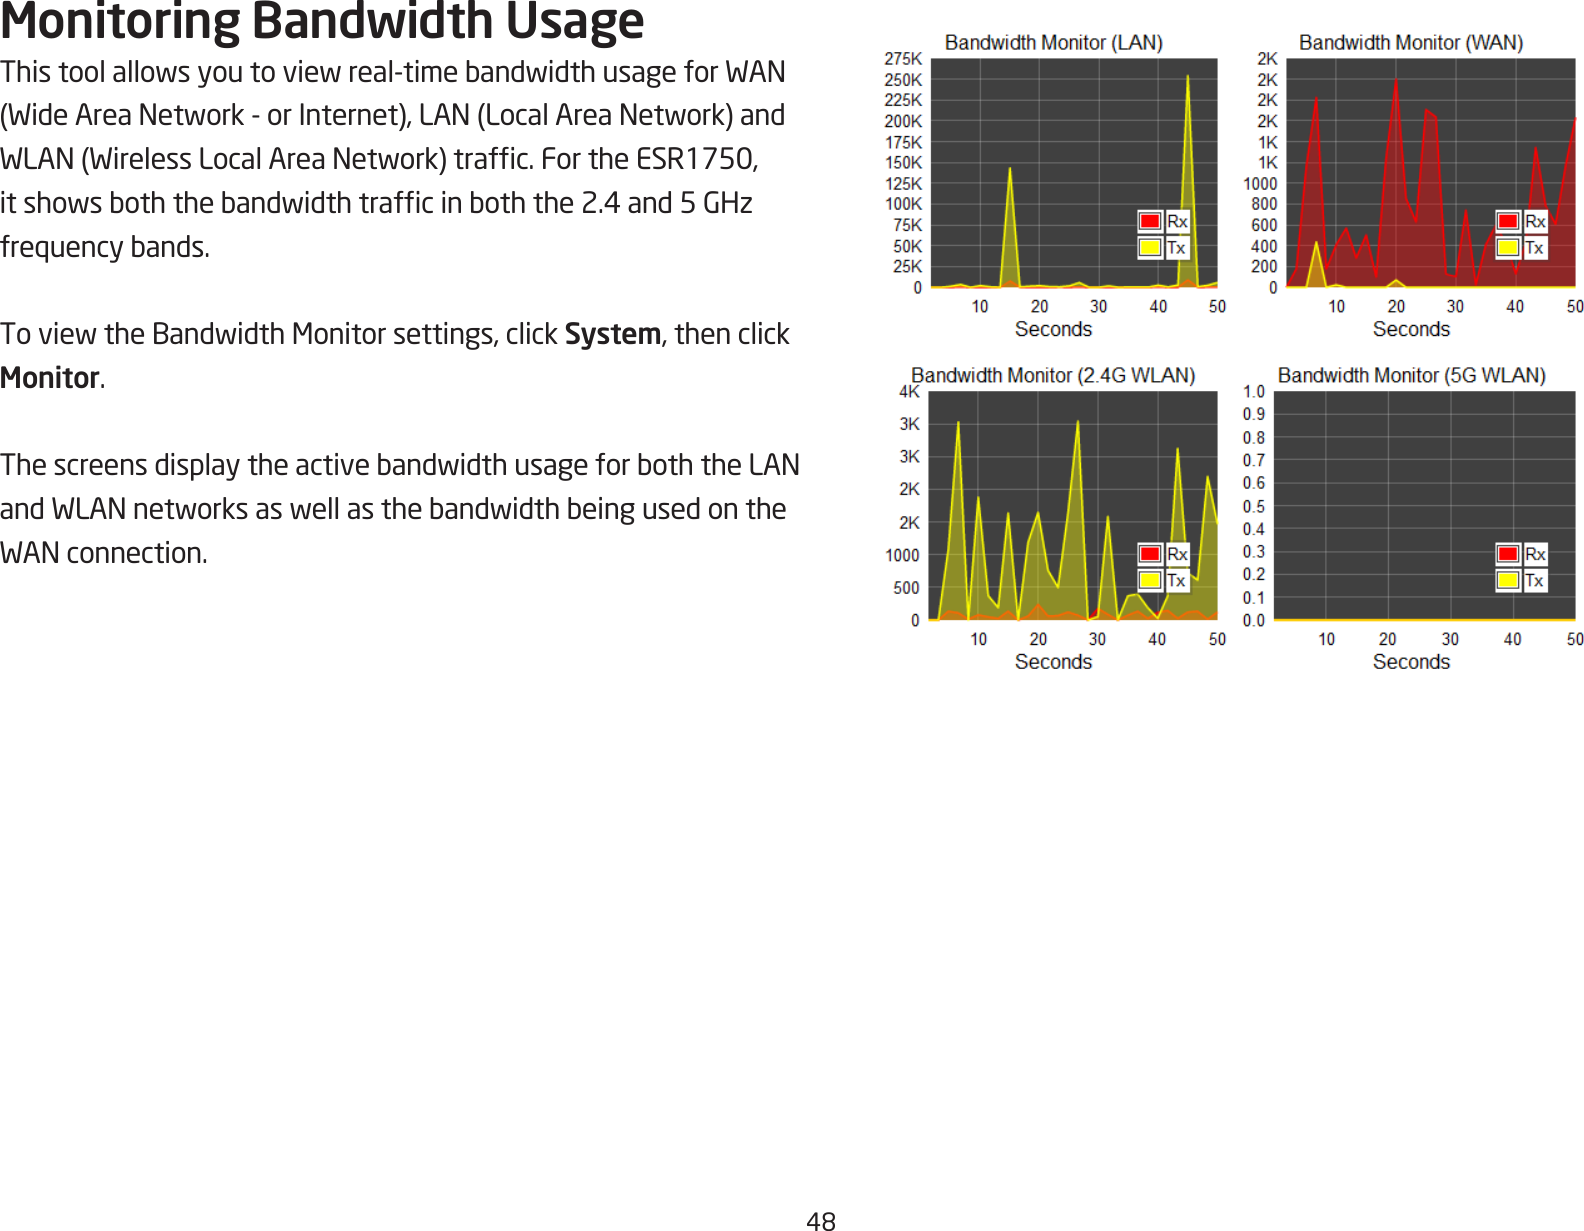 48Monitoring Bandwidth UsageThistoolallowsyoutoviewreal-timebandwidthusageforWAN(WideAreaNetwork-orInternet),LAN(LocalAreaNetwork)andWLAN(WirelessLocalAreaNetwork)trafc.FortheESR1750,itshowsboththebandwidthtrafcinboththe2.4and5GHzfrequencybands.ToviewtheBandwidthMonitorsettings,clickSystem, then click Monitor.ThescreensdisplaytheactivebandwidthusageforboththeLANandWLANnetworksaswellasthebandwidthbeingusedontheWANconnection.